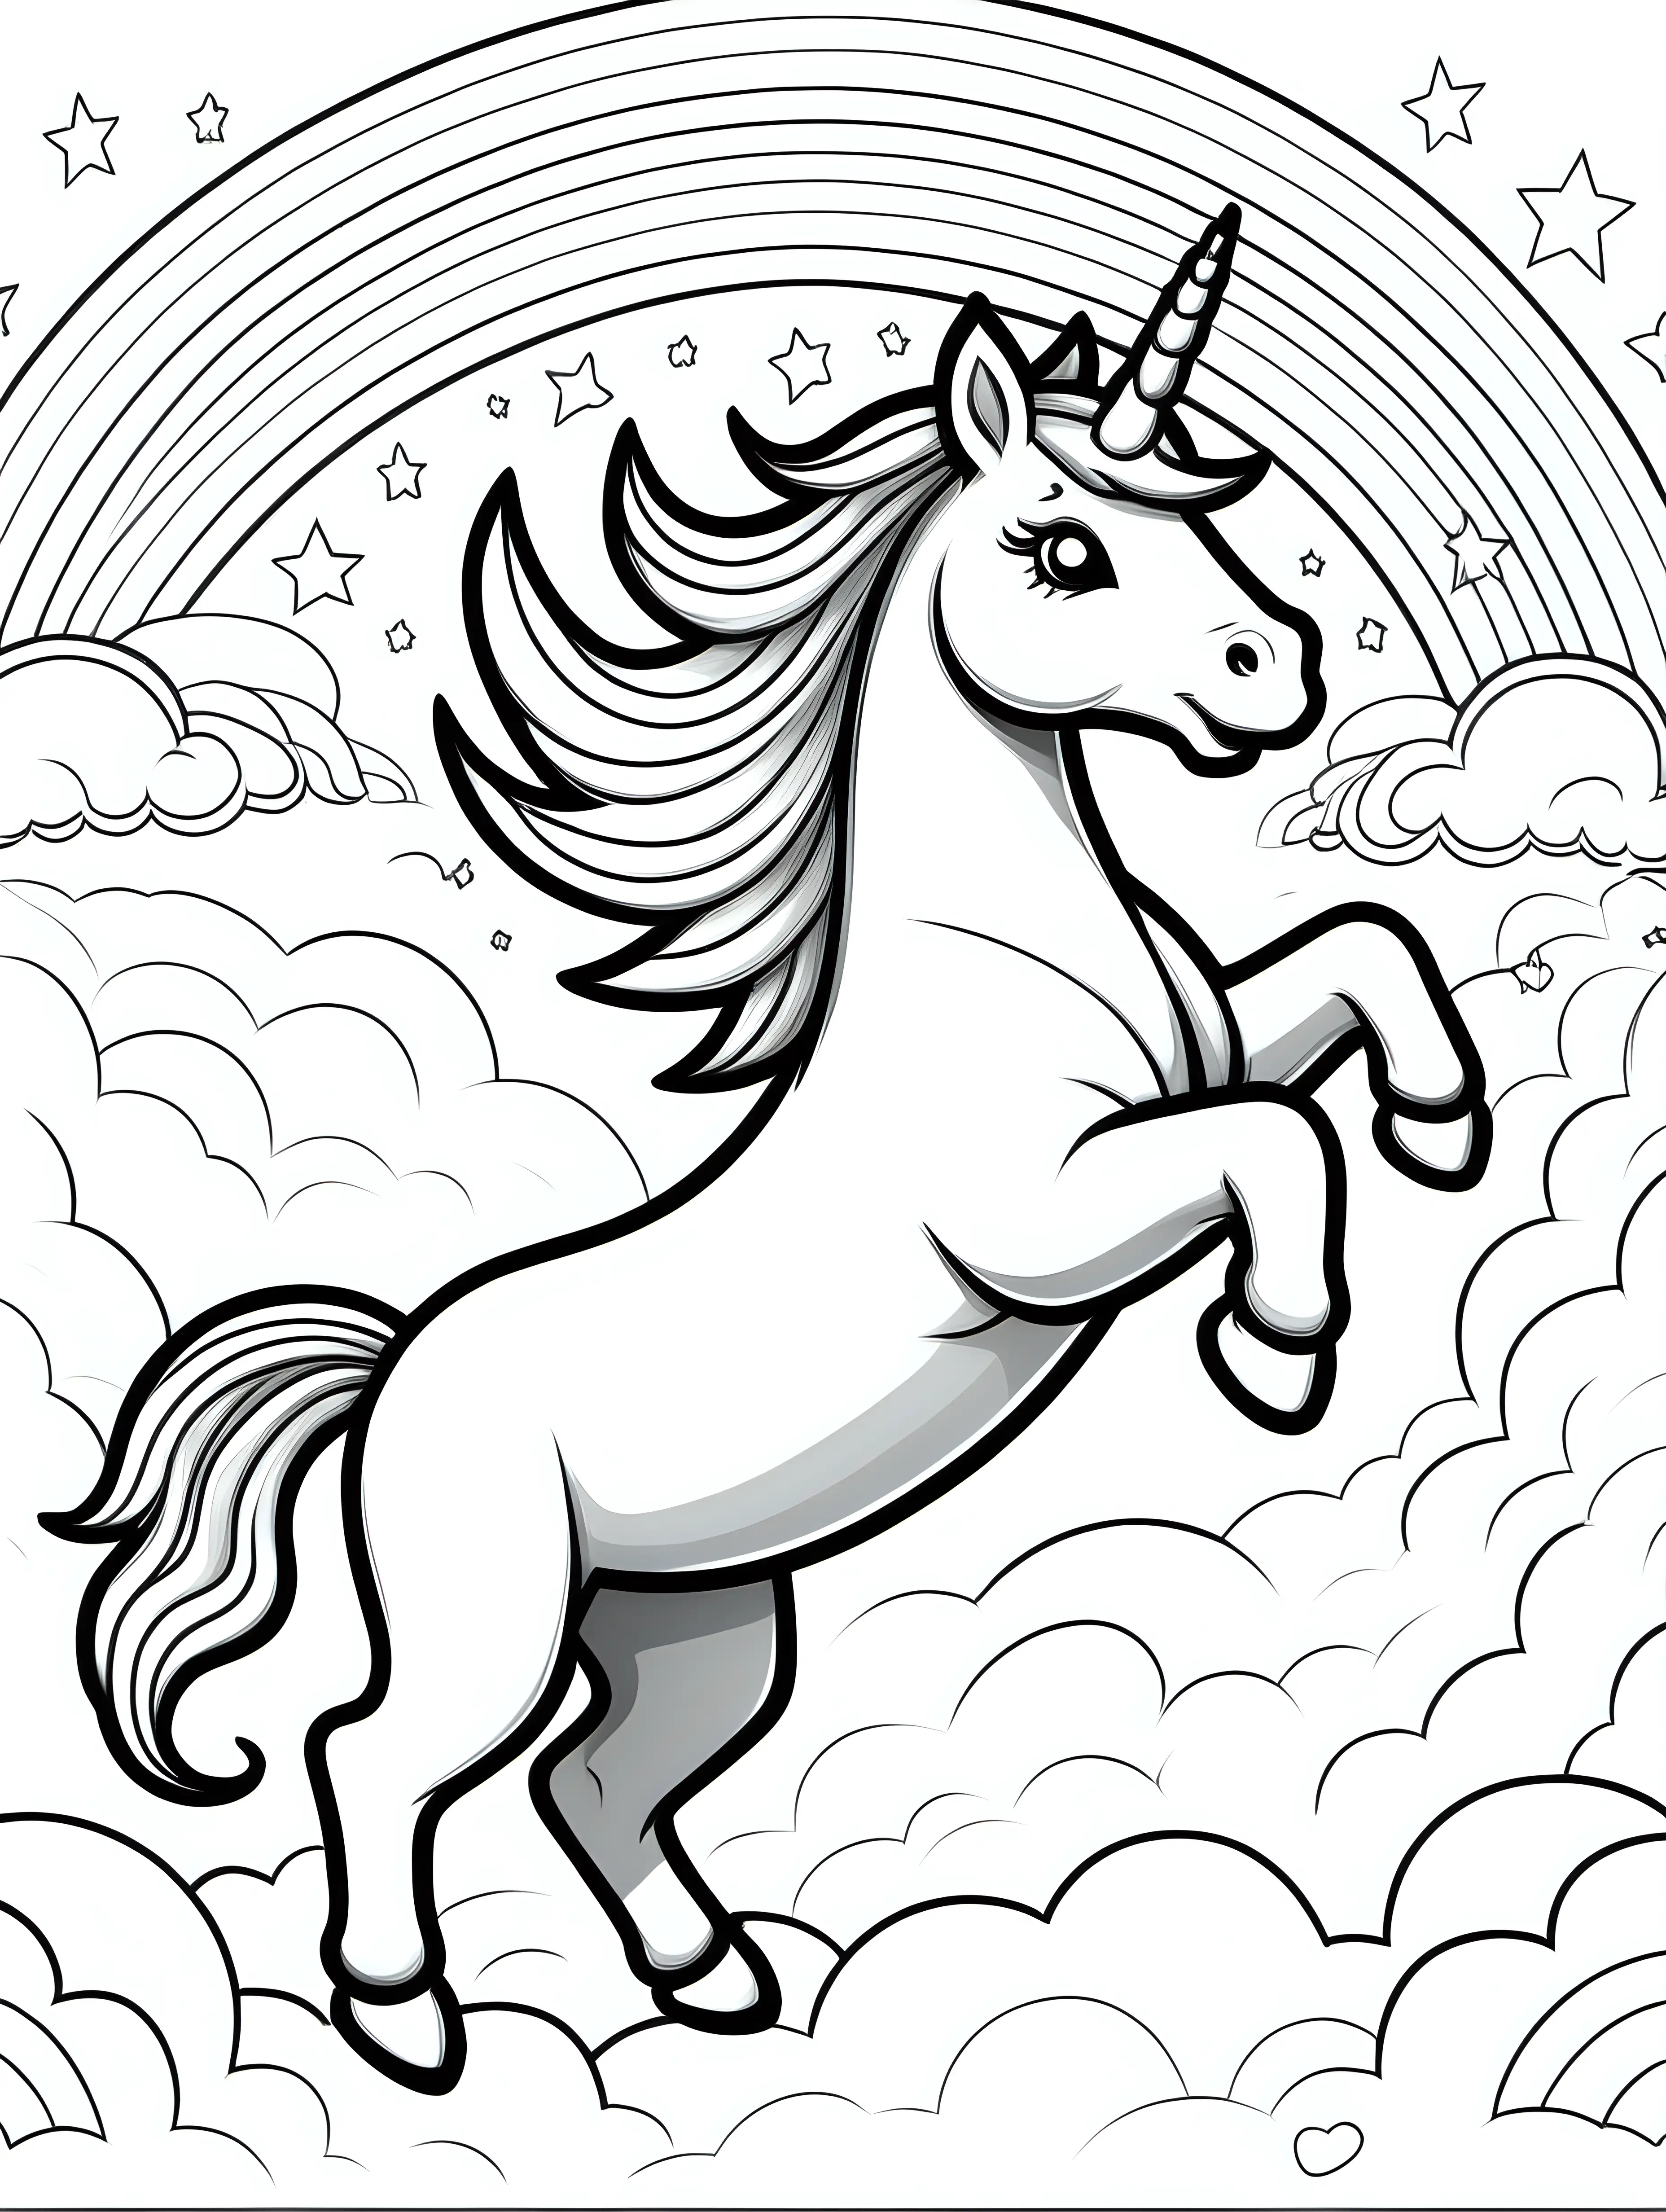 /imagine coloring pages for kids, playful unicorn jumping over a rainbow, cartoon style, thick lines, low detail, black and white - - ar 85:110